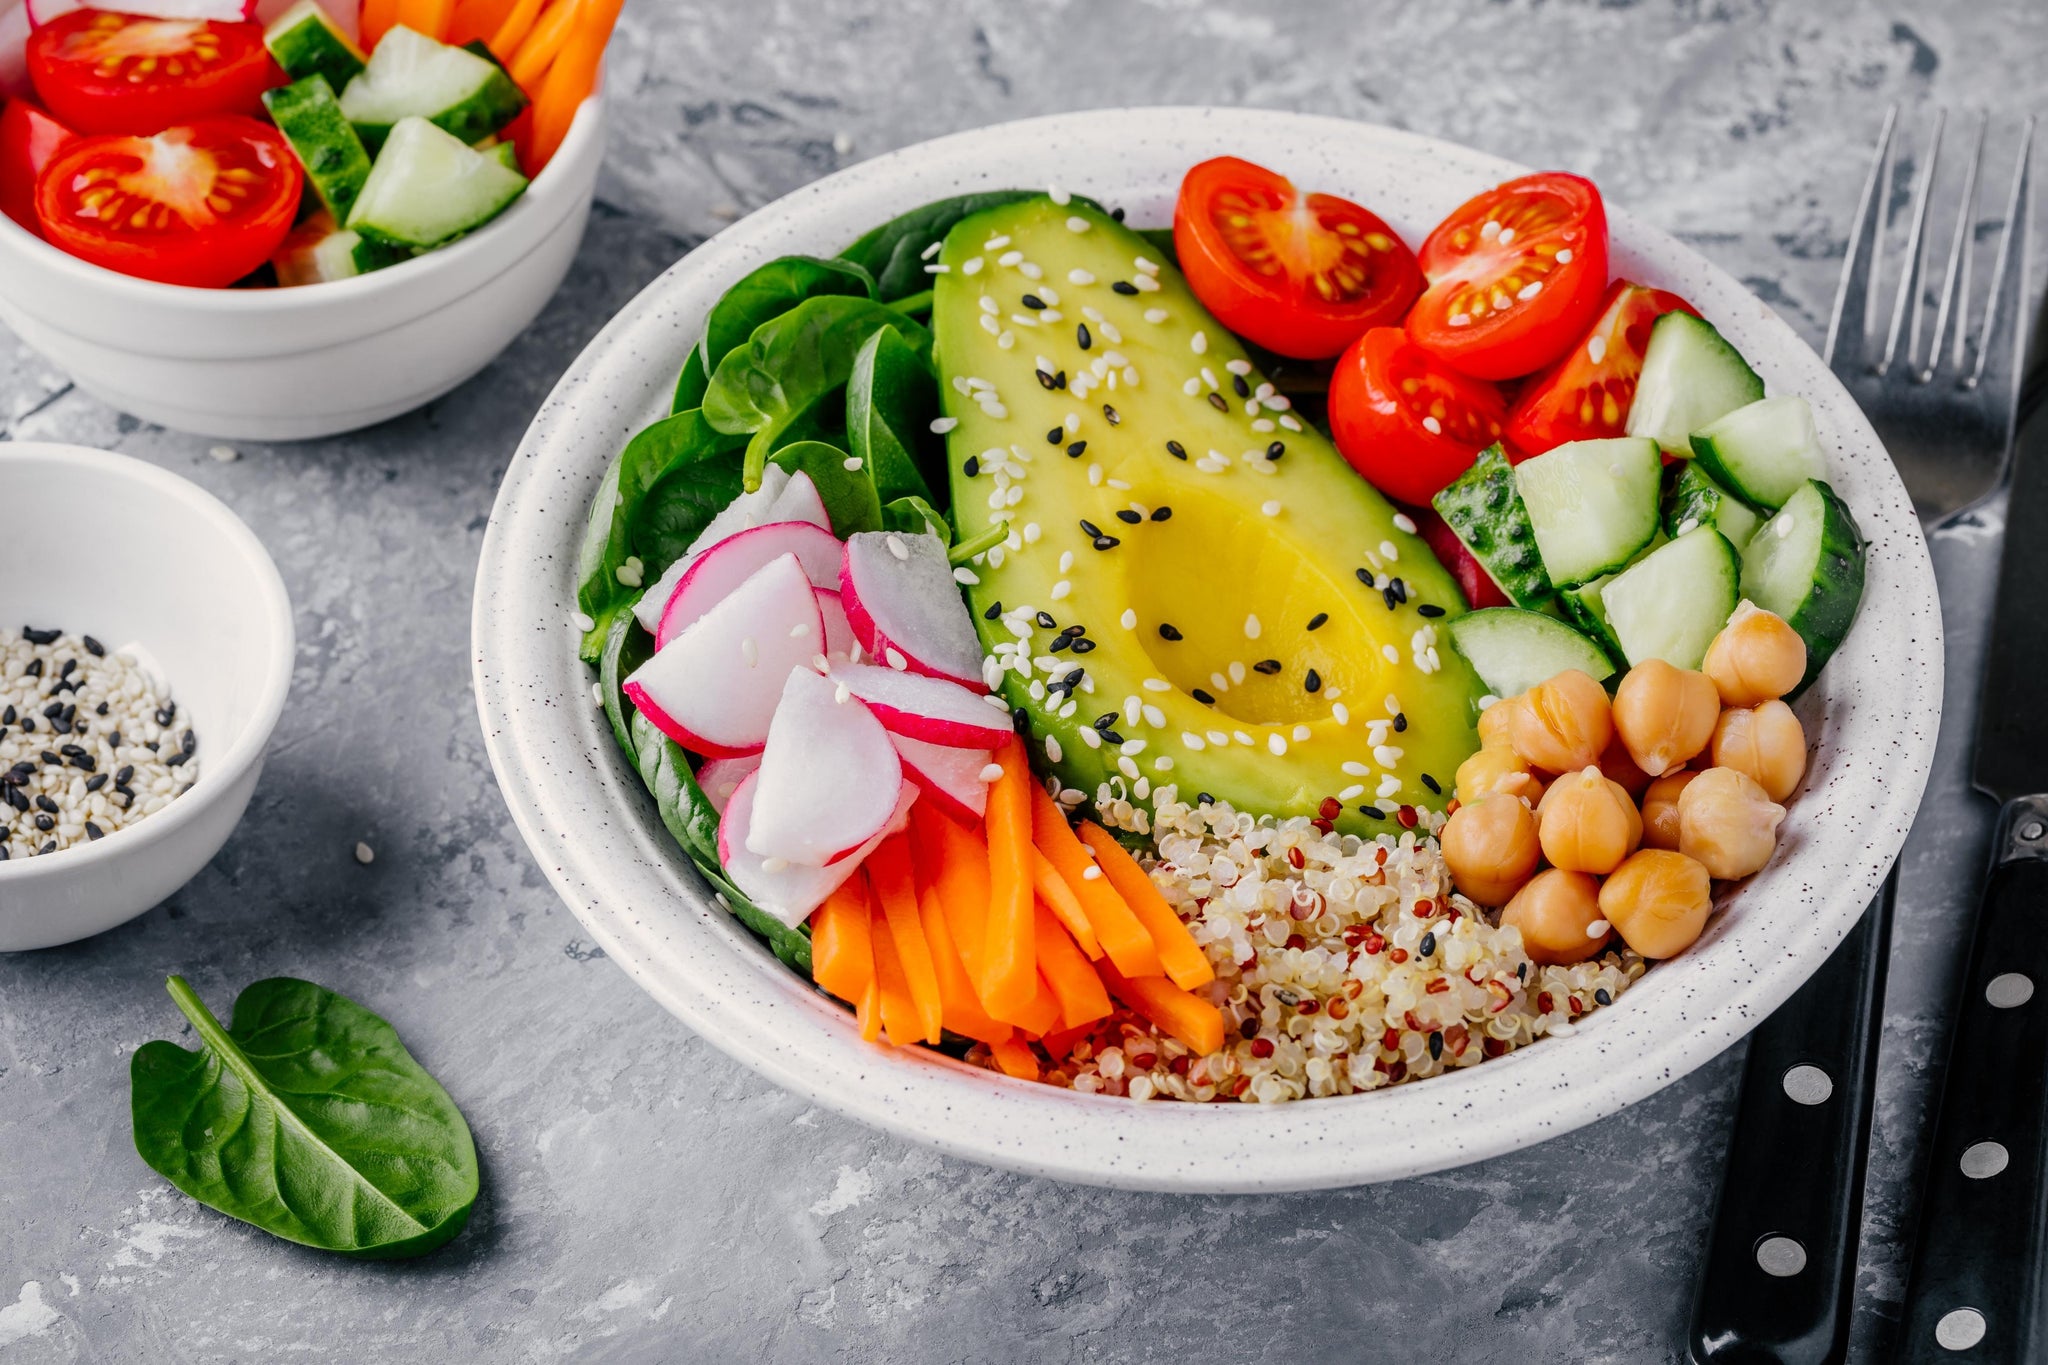 A bowl of avocado, chickpeas, cucumber, tomatoes, carrots, quinoa, and spinach: a diet recommended for high school football players